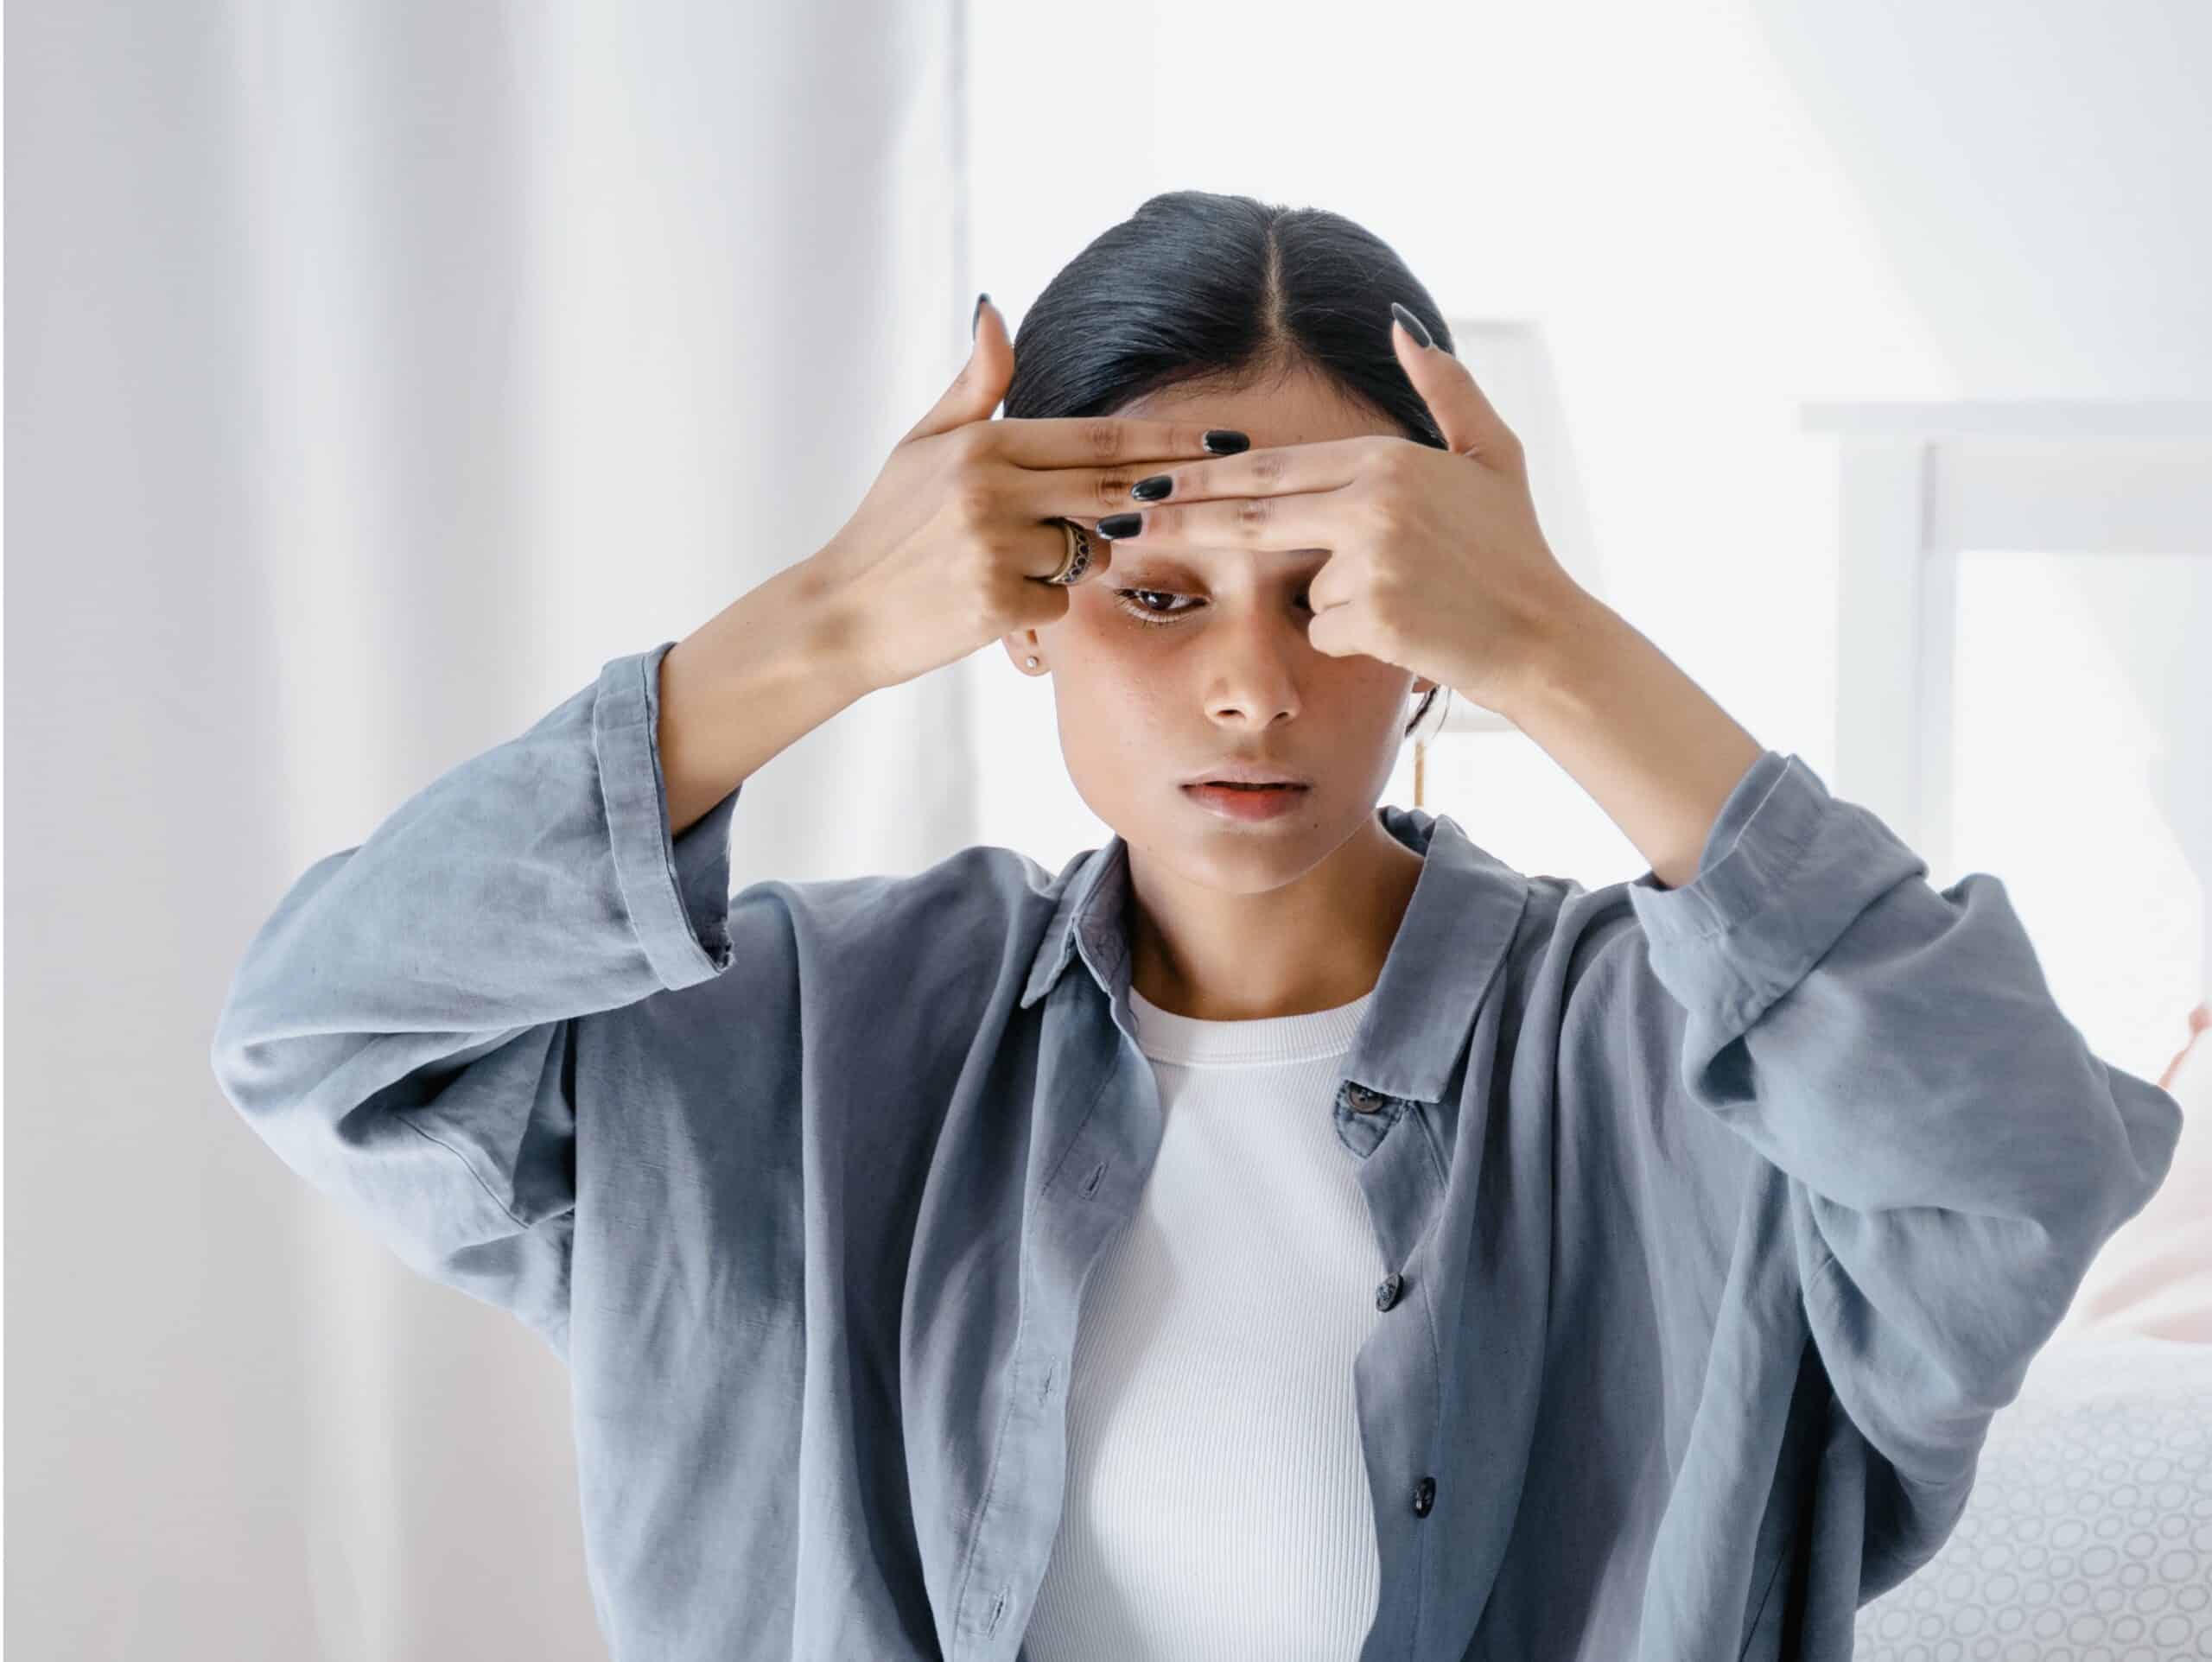 4 easy ways to relieve headaches with self-Massage